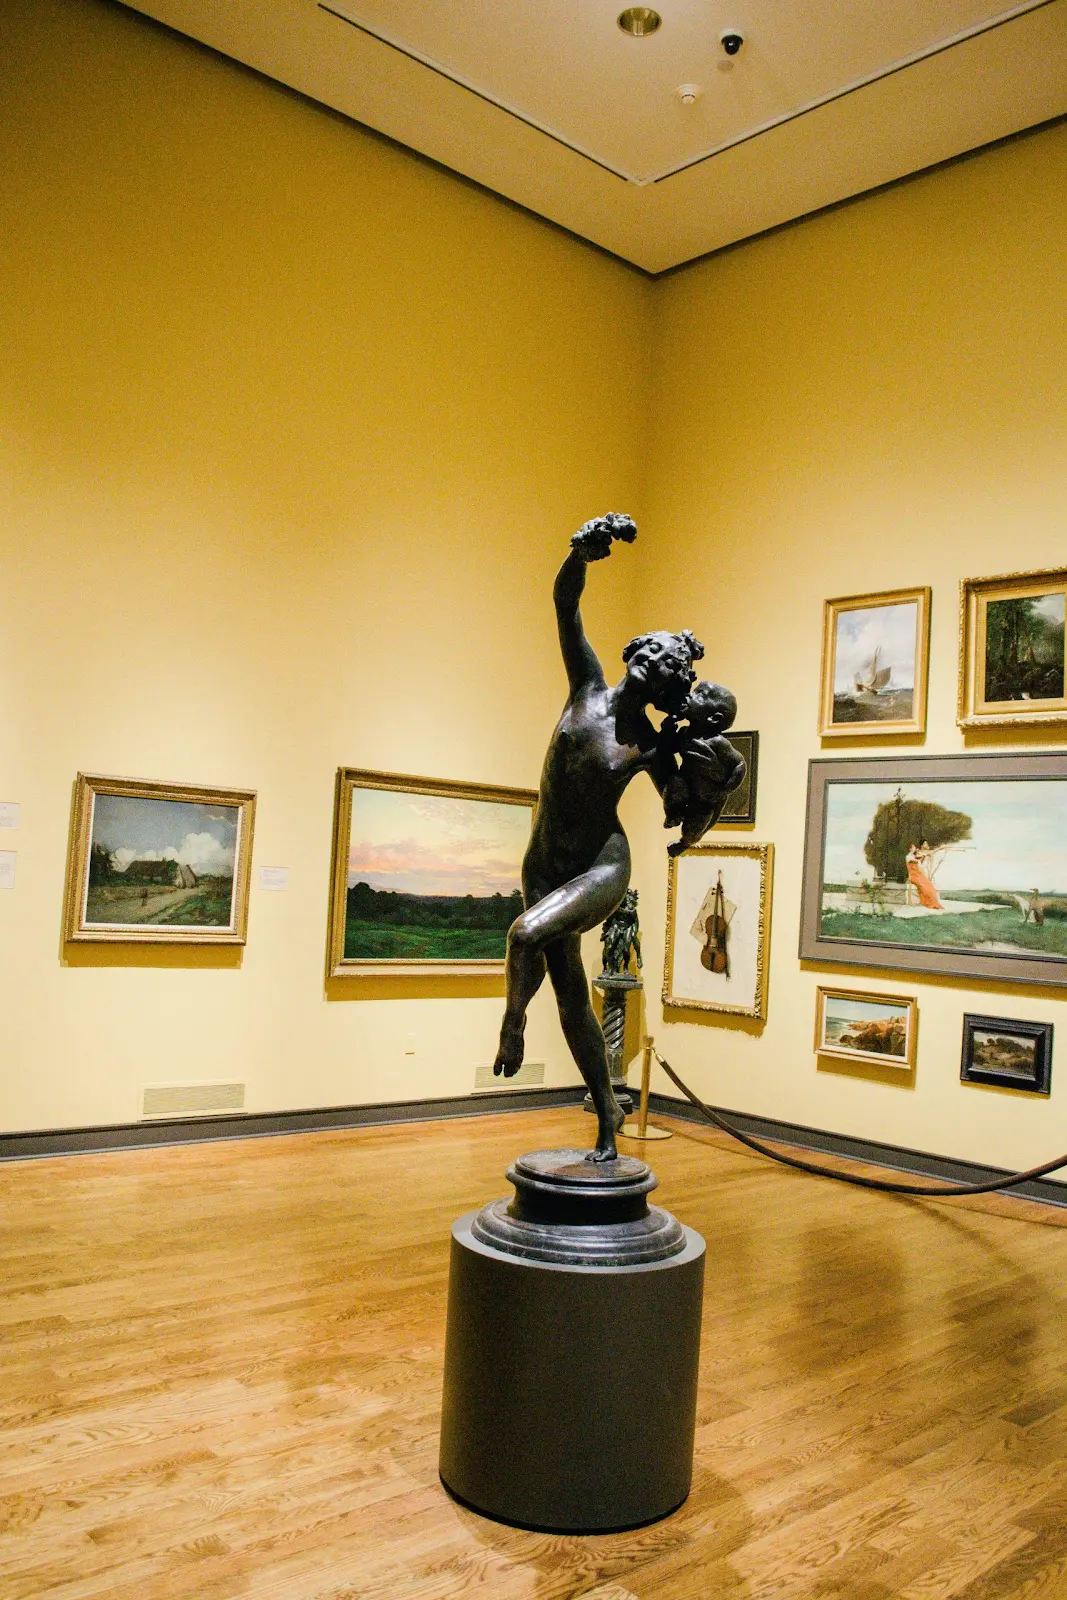 Museums in Wilmington and the Brandywine Valley
